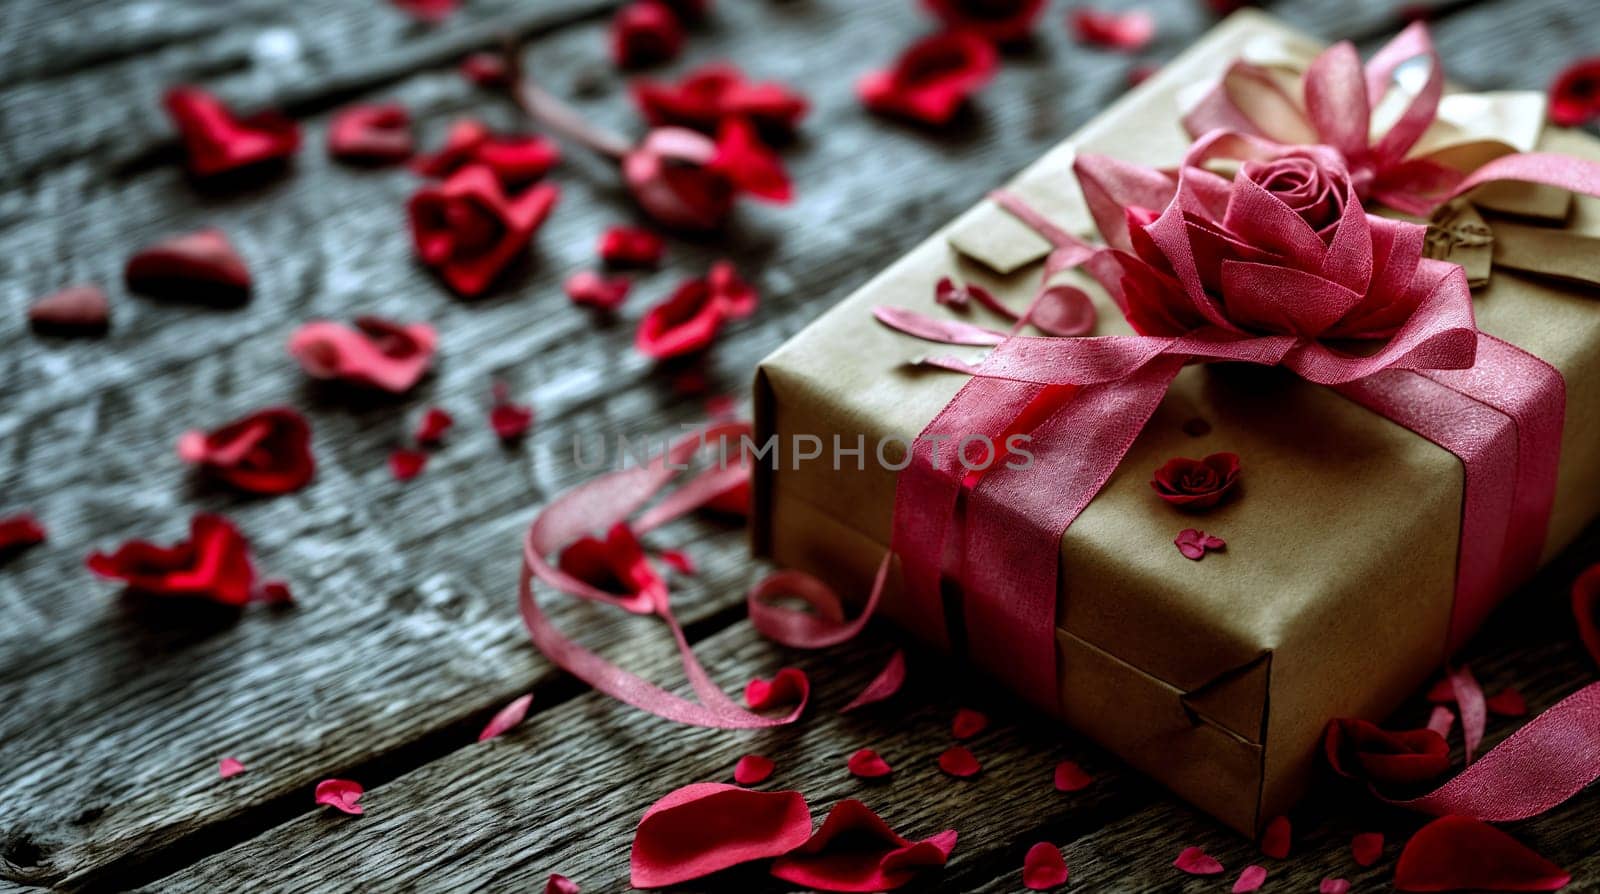 Craft paper gift adorned with a luxurious red ribbon and rose, nestled among scattered petals - Valentine's day background by chrisroll